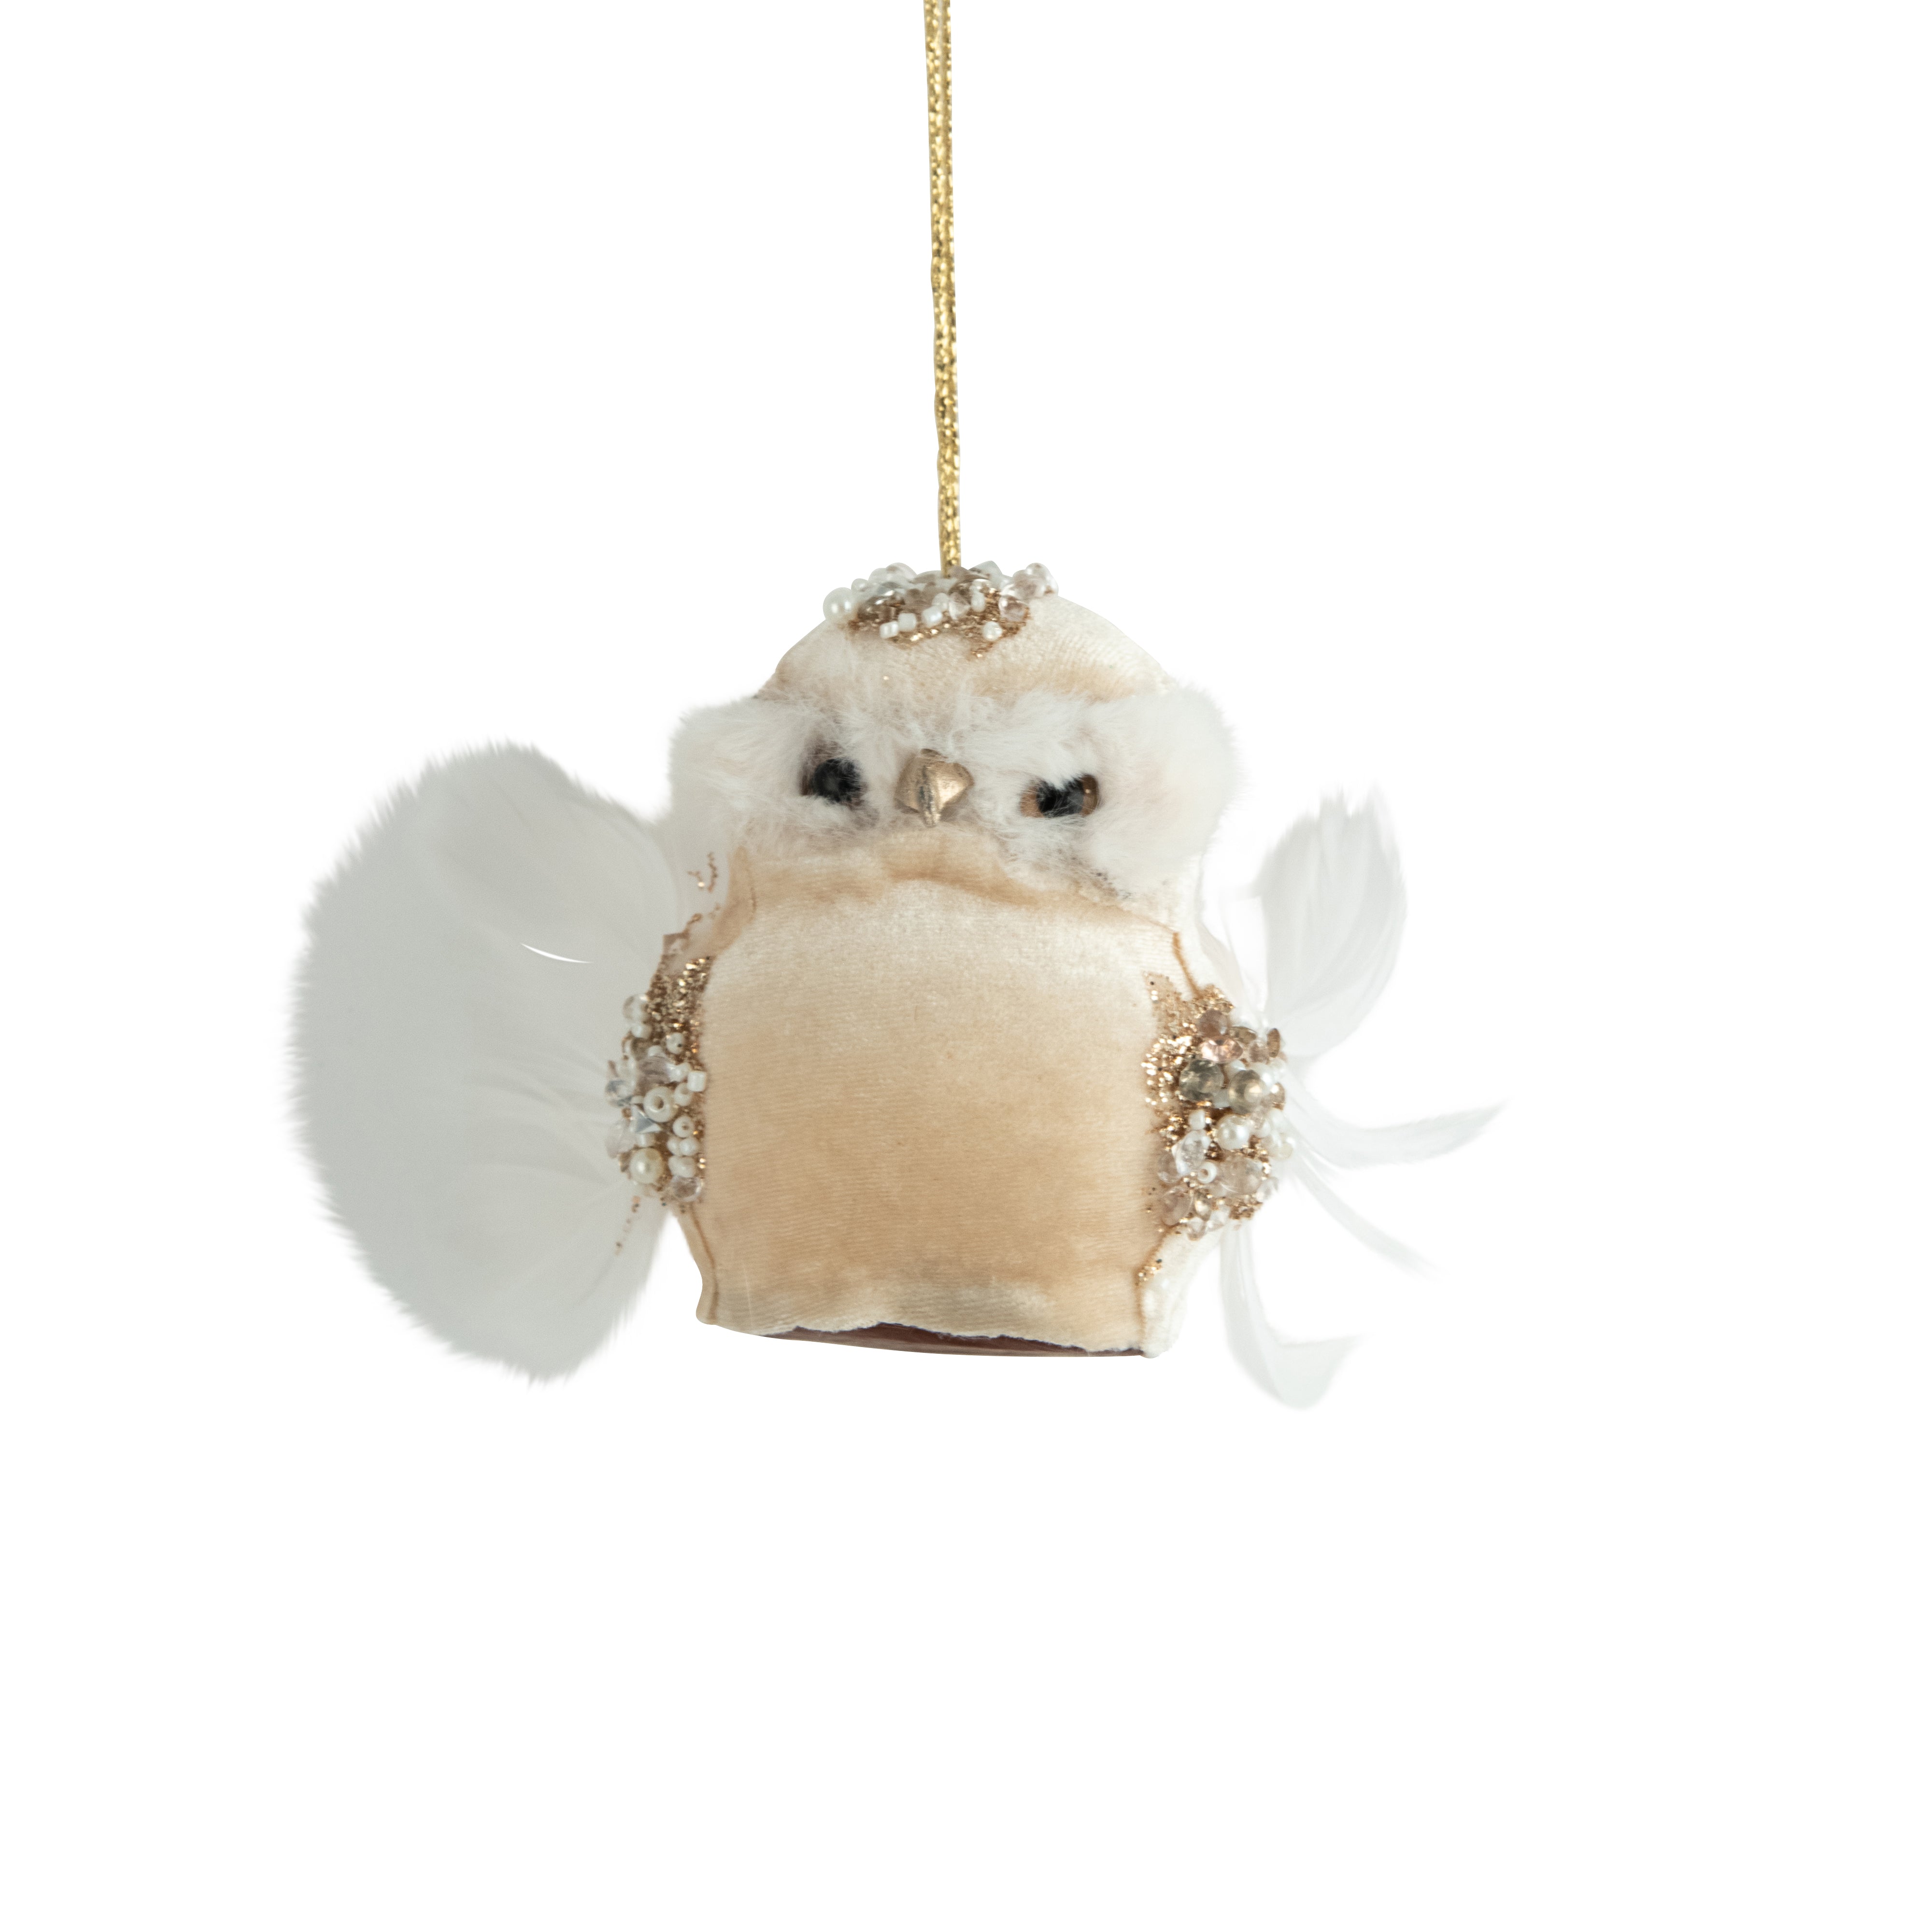 Fabric Cream and Gold Owl Hanging Ornament